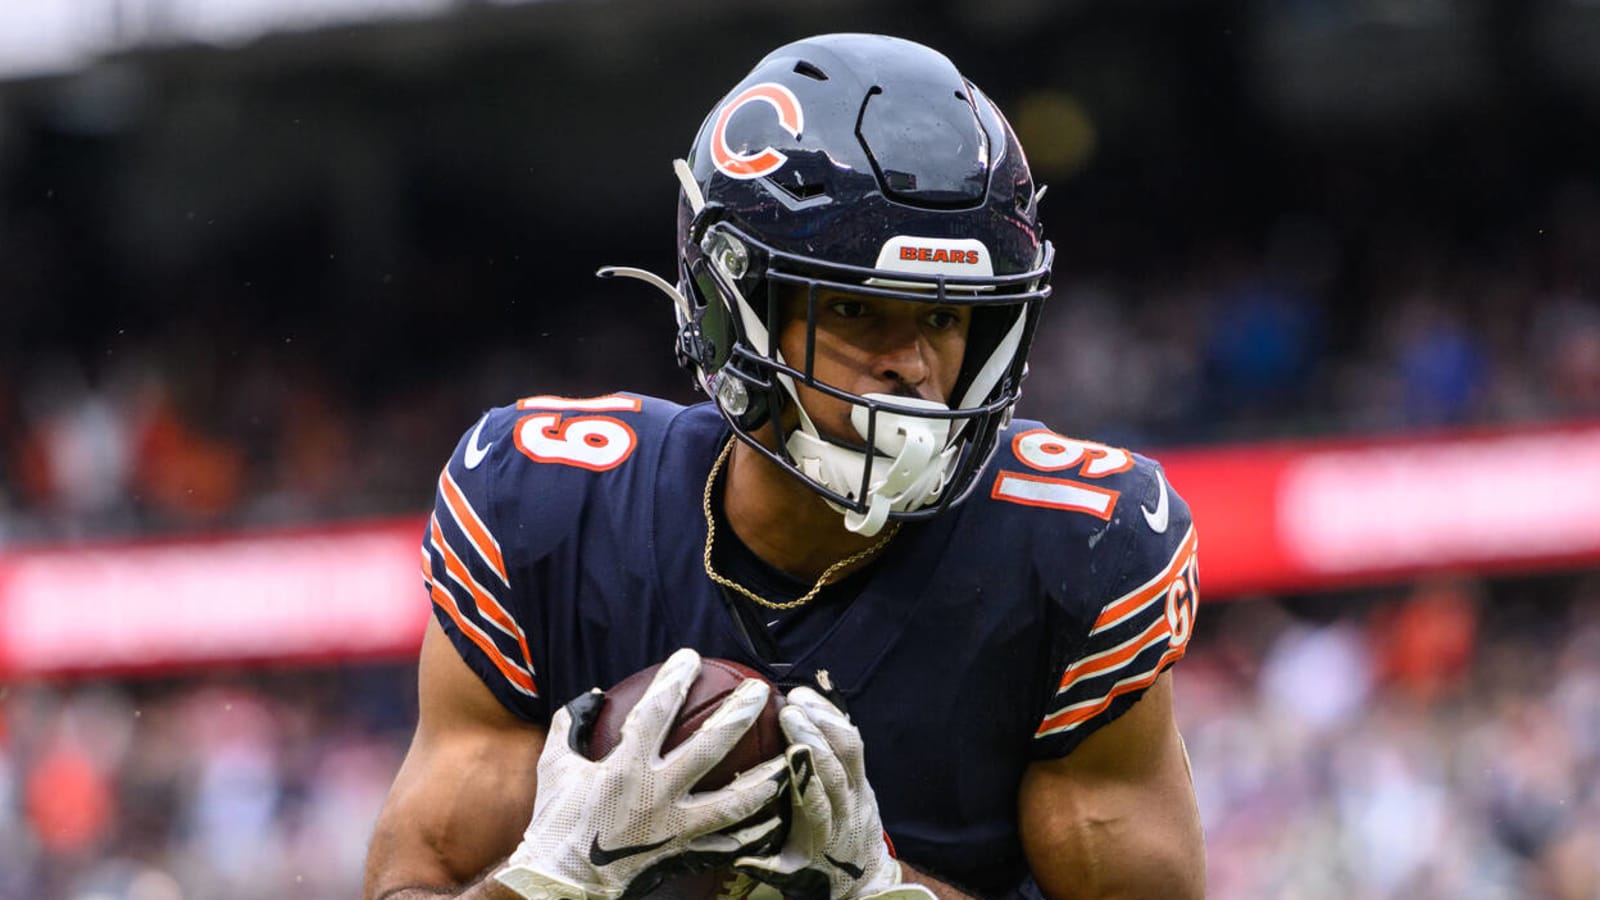 Bears to extend WR Equanimeous St. Brown